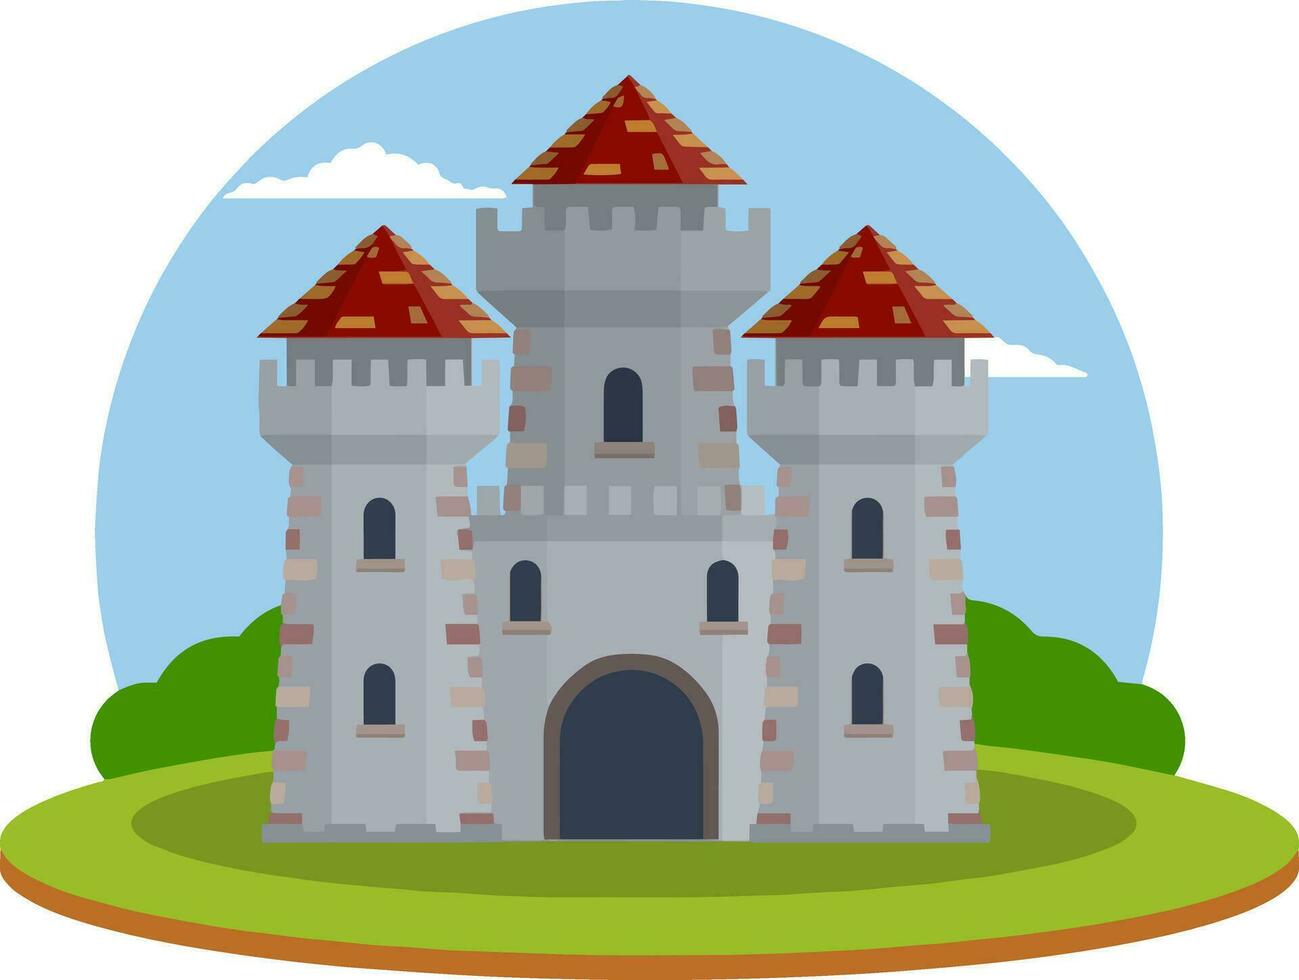 Military building of knight and king. Defense and reliability. Tower, wall and gate. Cartoon flat illustration. Green landscape vector